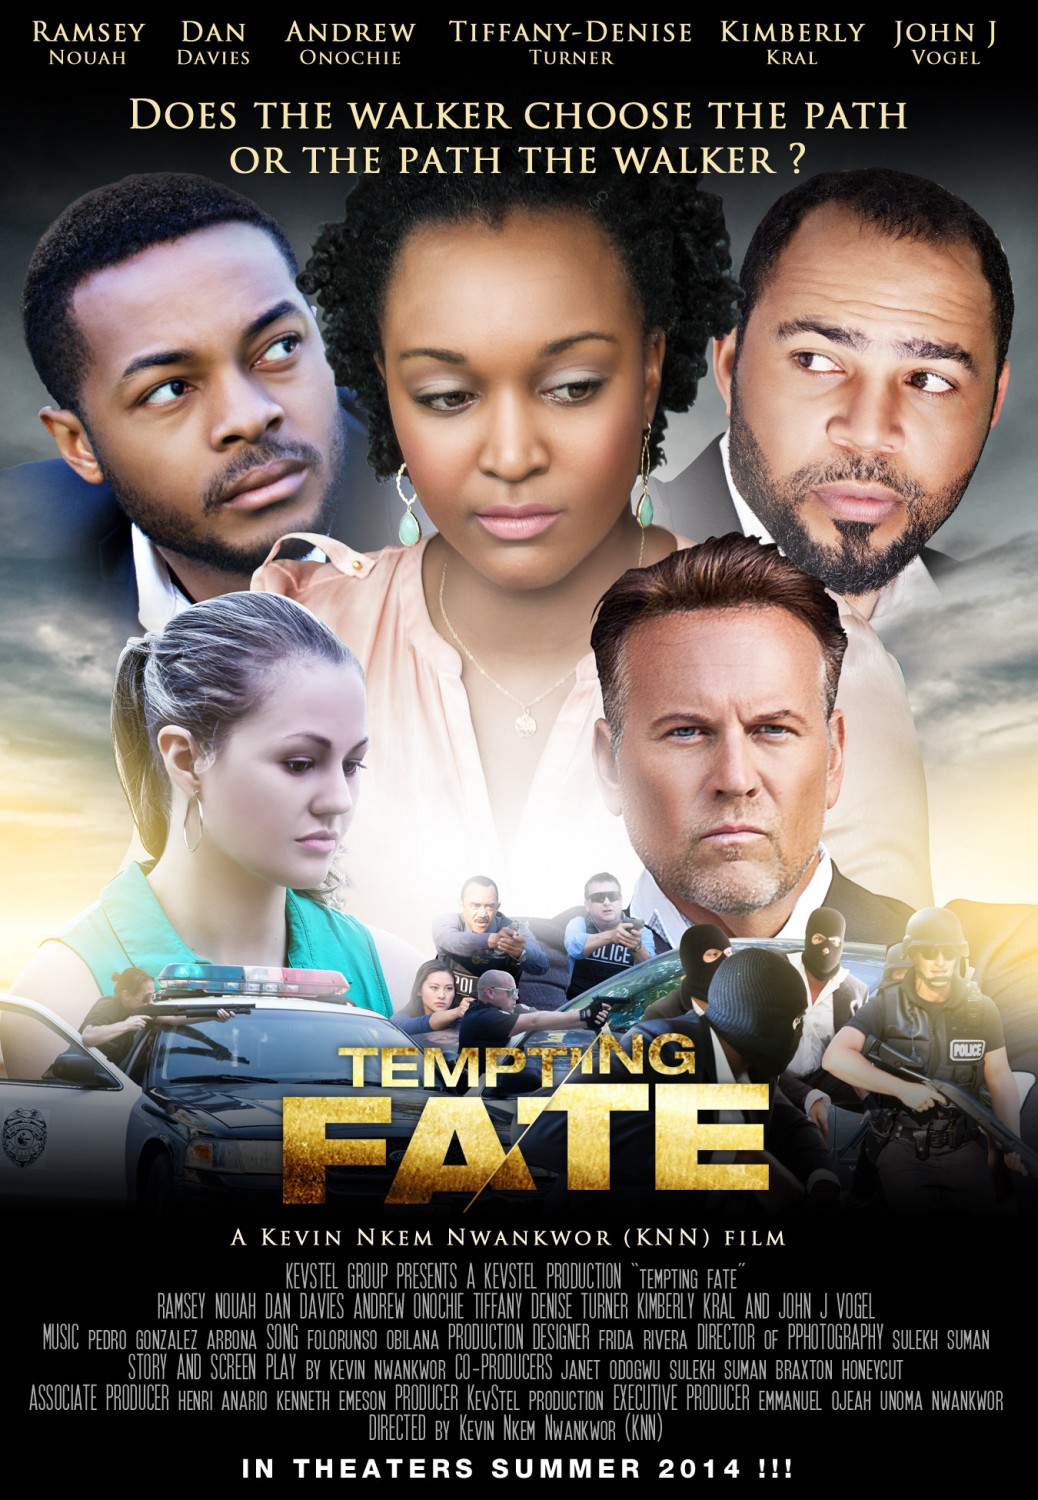 Extra Large Movie Poster Image for Tempting Fate 